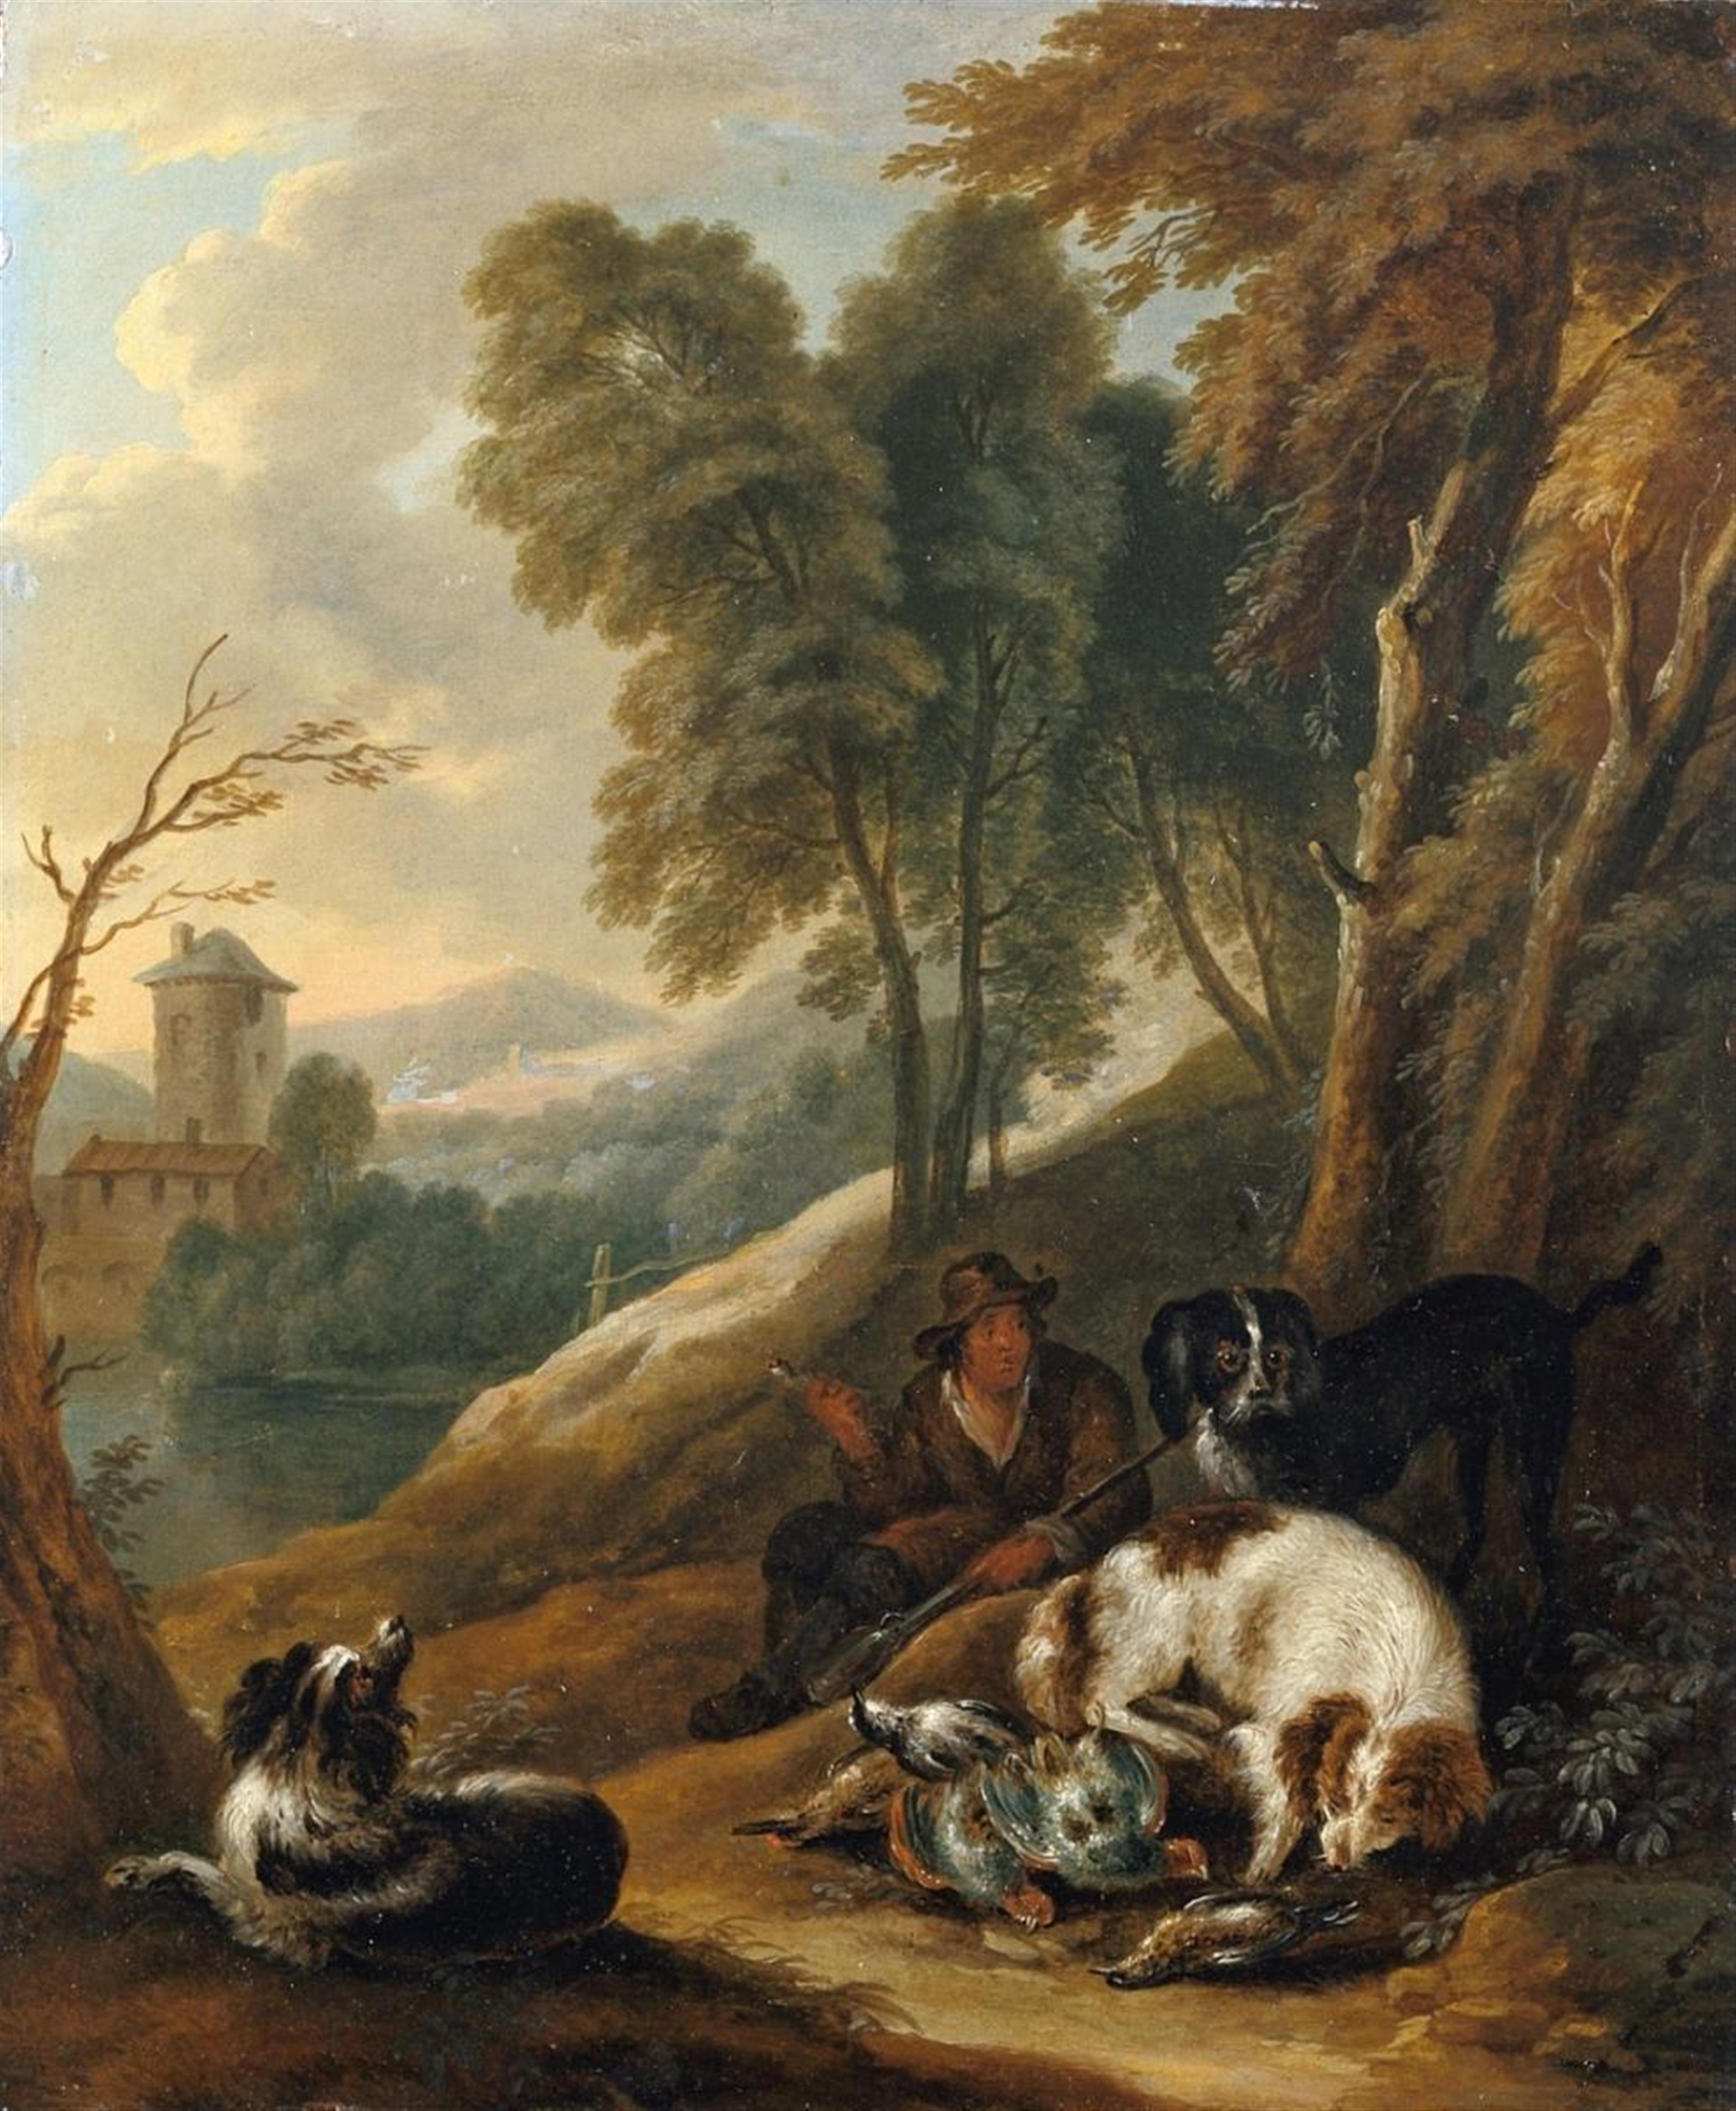 Adriaen de Gryeff - SOUTHERN LANDSCAPE WITH HUNTSMAN, DOGS AND HUNTING BAG - image-1